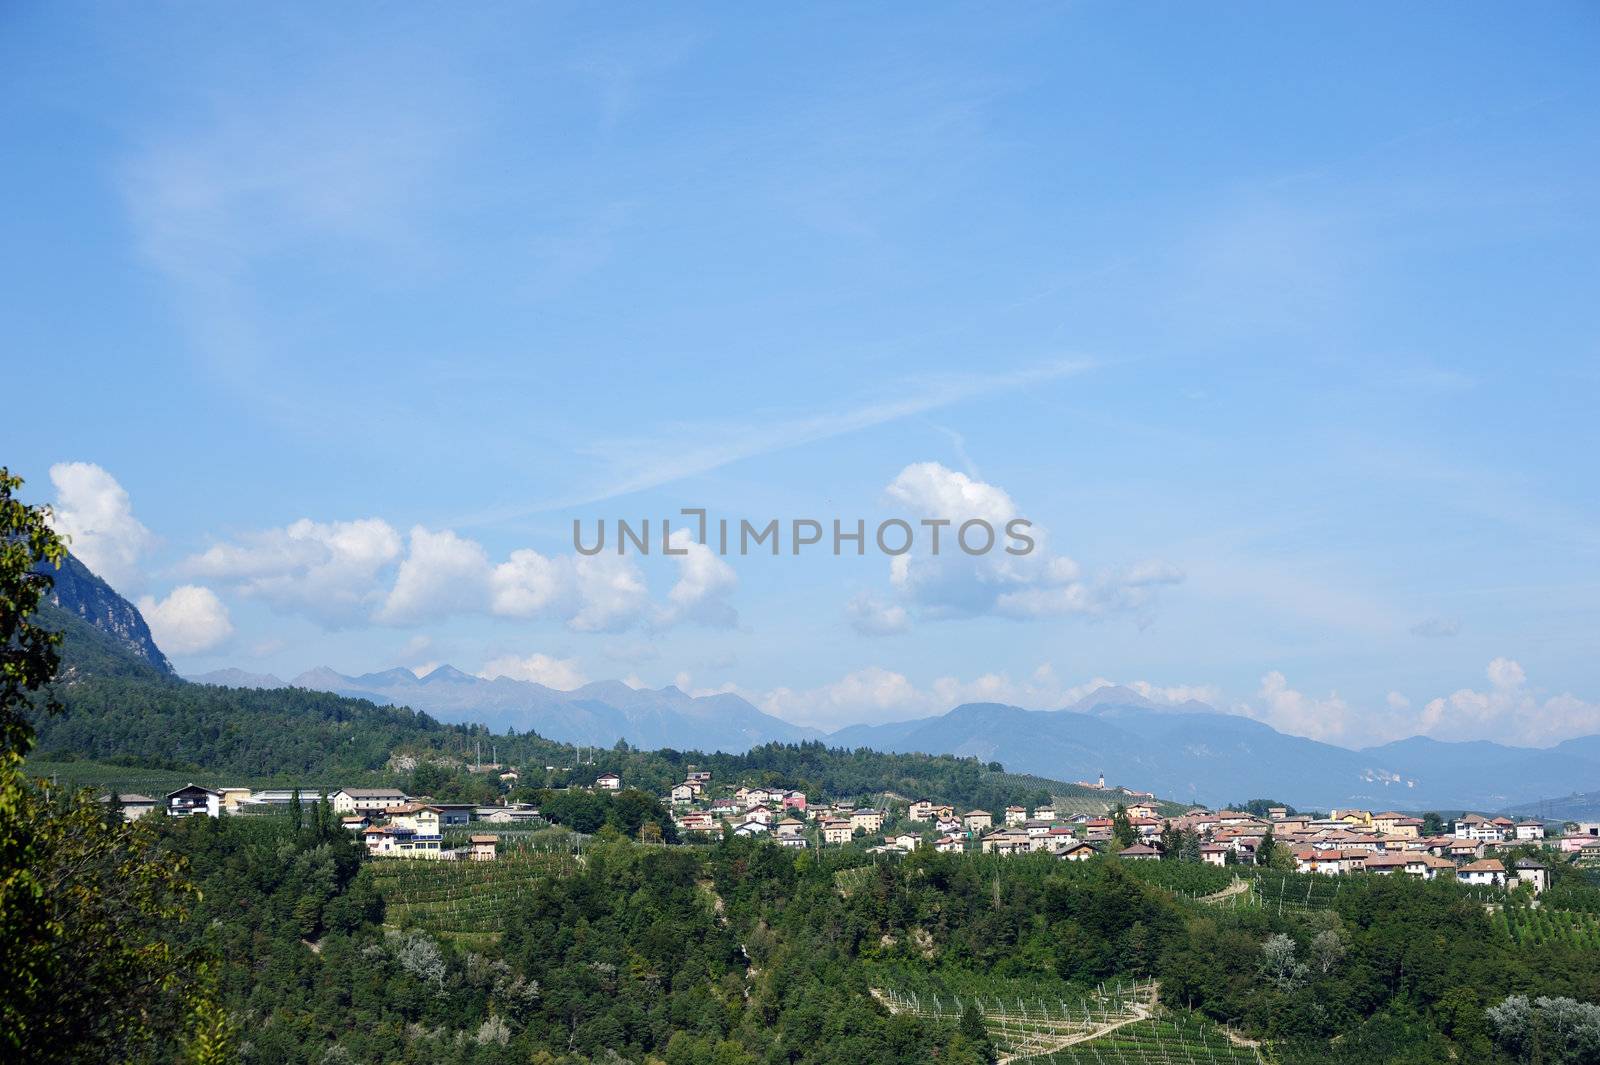 An image of a village in the mountains and blue sky